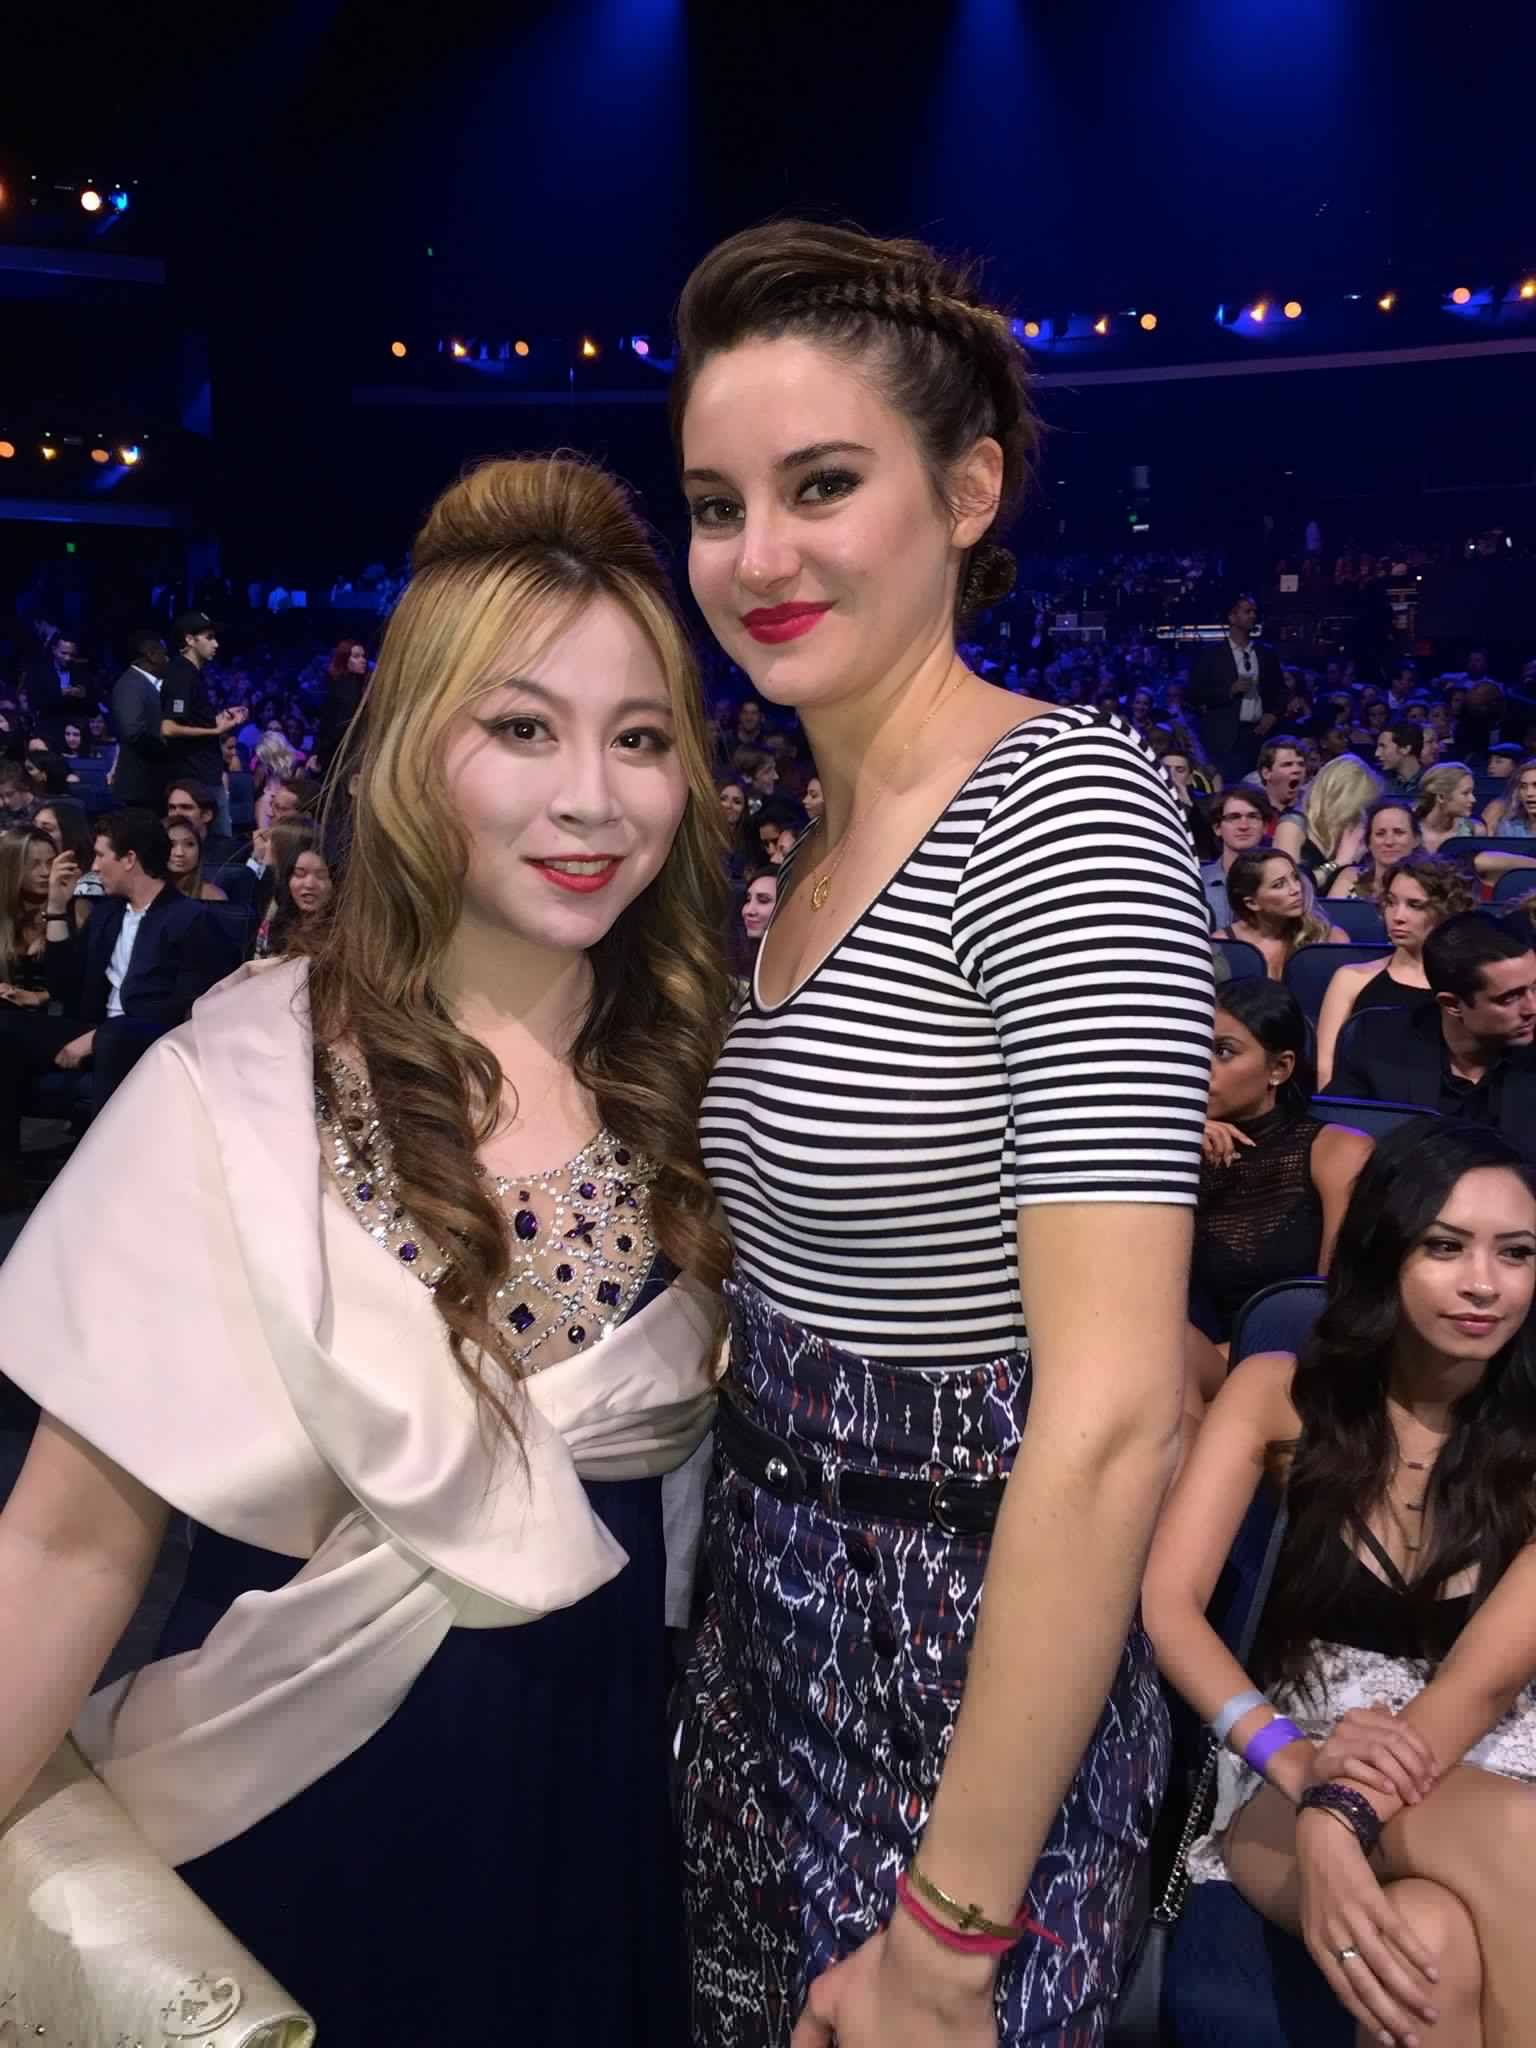 Actress shailene woodley and Alice Aoki on the front row of MTV Movie Awards